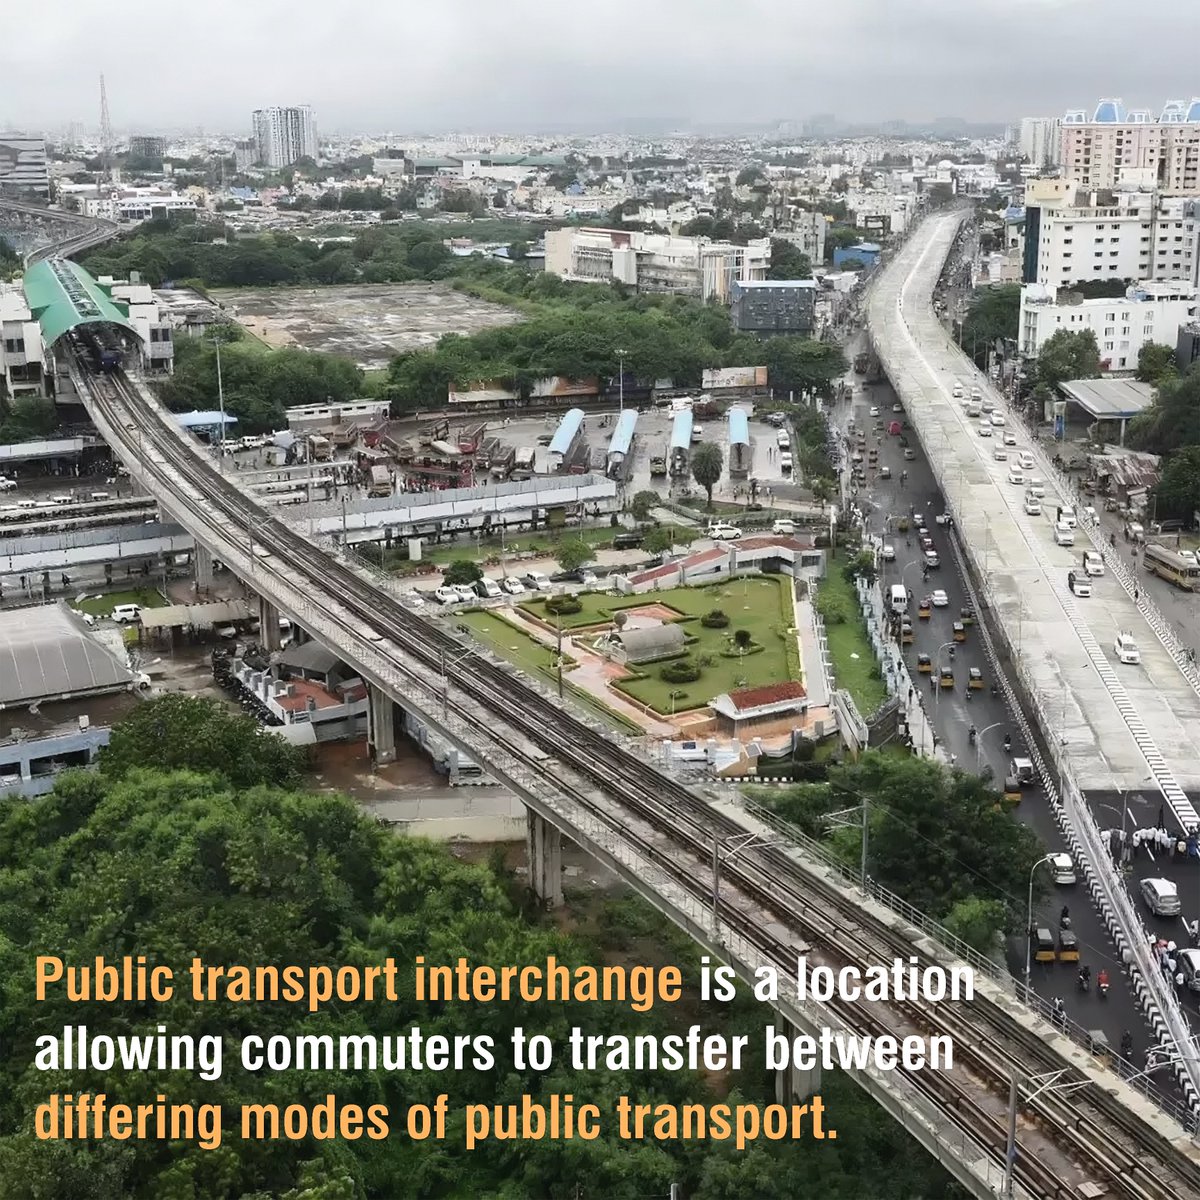 A-Z of Urban Design
I-Interchange, Public transport interchange is a location allowing commuters to transfer between differing modes of public transport.

#interchange #transport #transportdesign #modesoftransport #publictransport #urbandesign #designforall